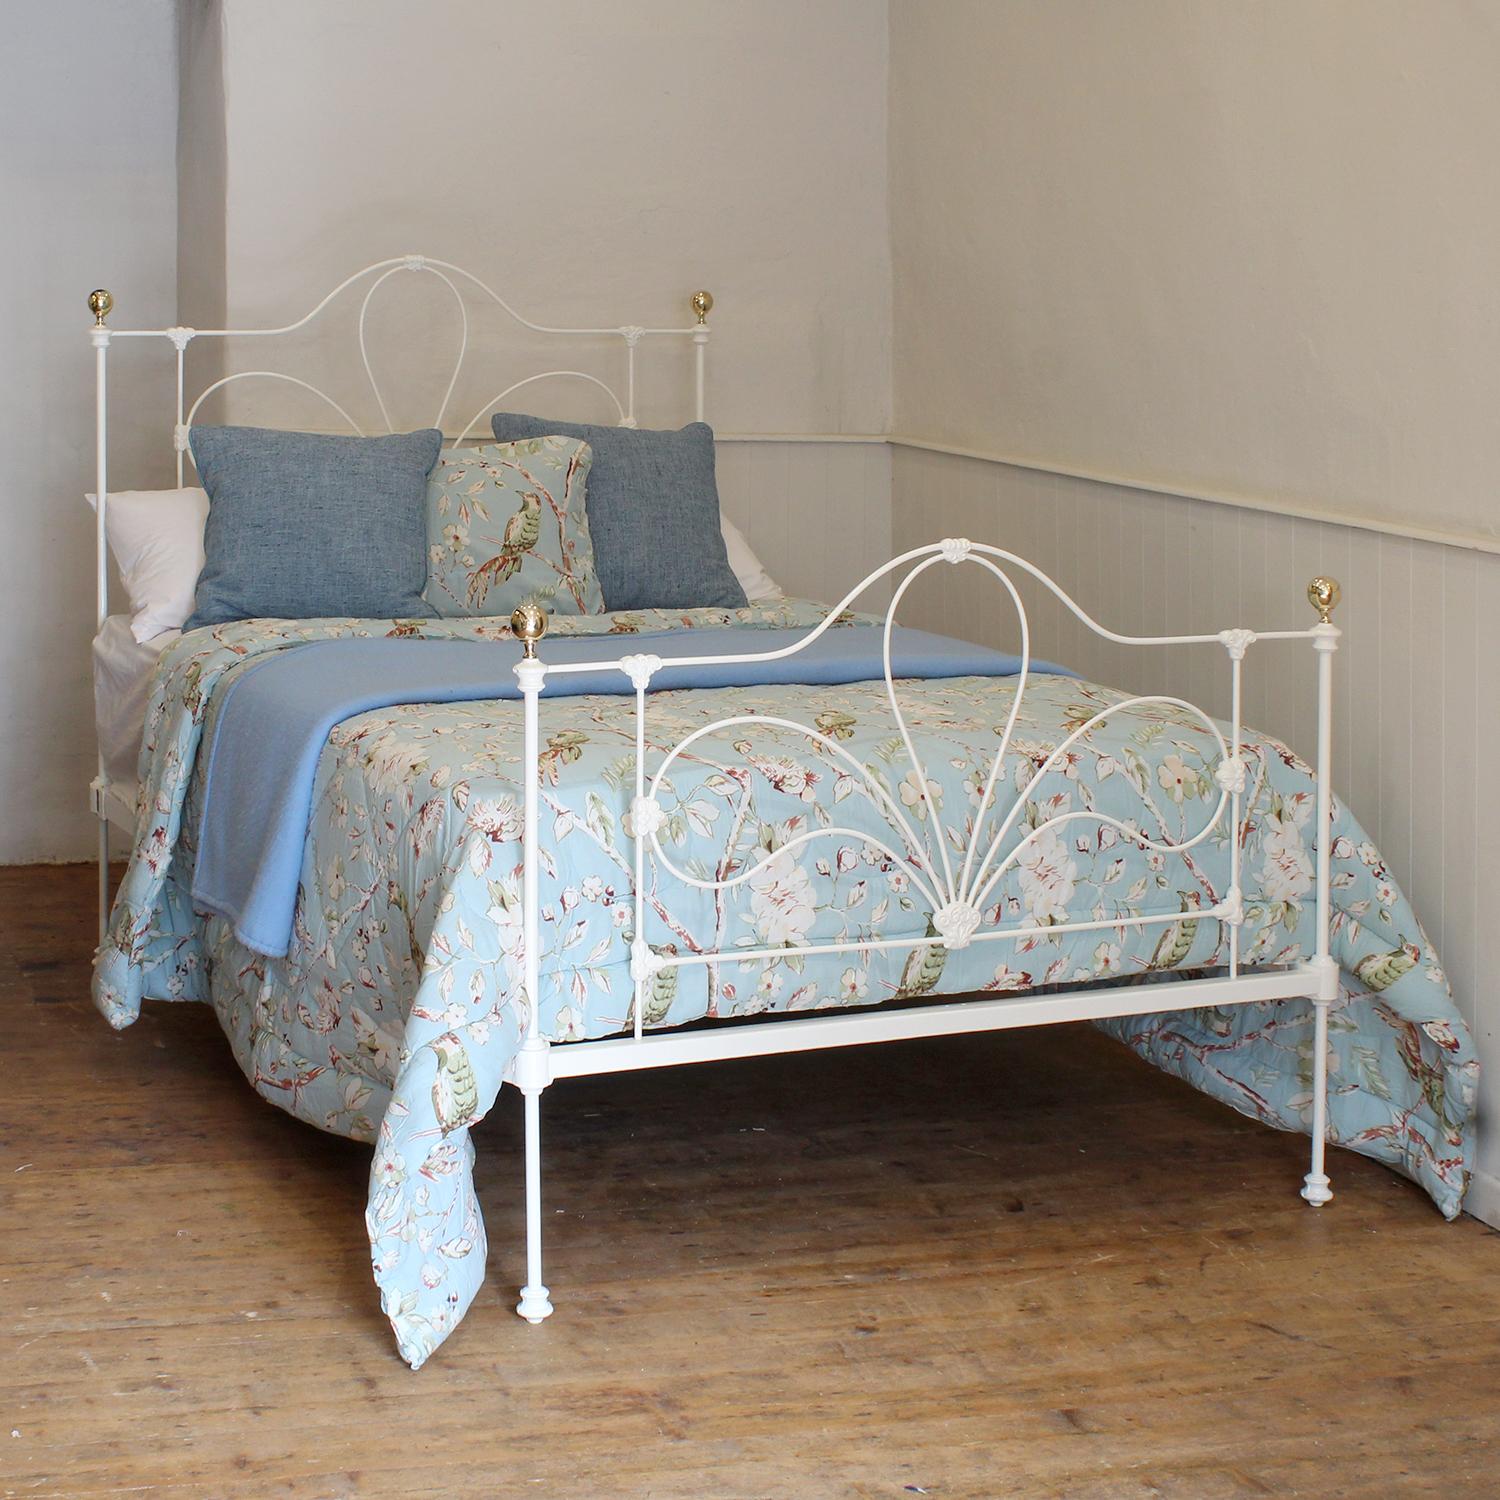 A Victorian cast iron bedstead finished in white with shaped panels and dainty, decorative castings.

This bed accepts a double size 4ft 6in wide (54 inch or 135cm) base and mattress. 

The price includes a firm standard bed base to support the